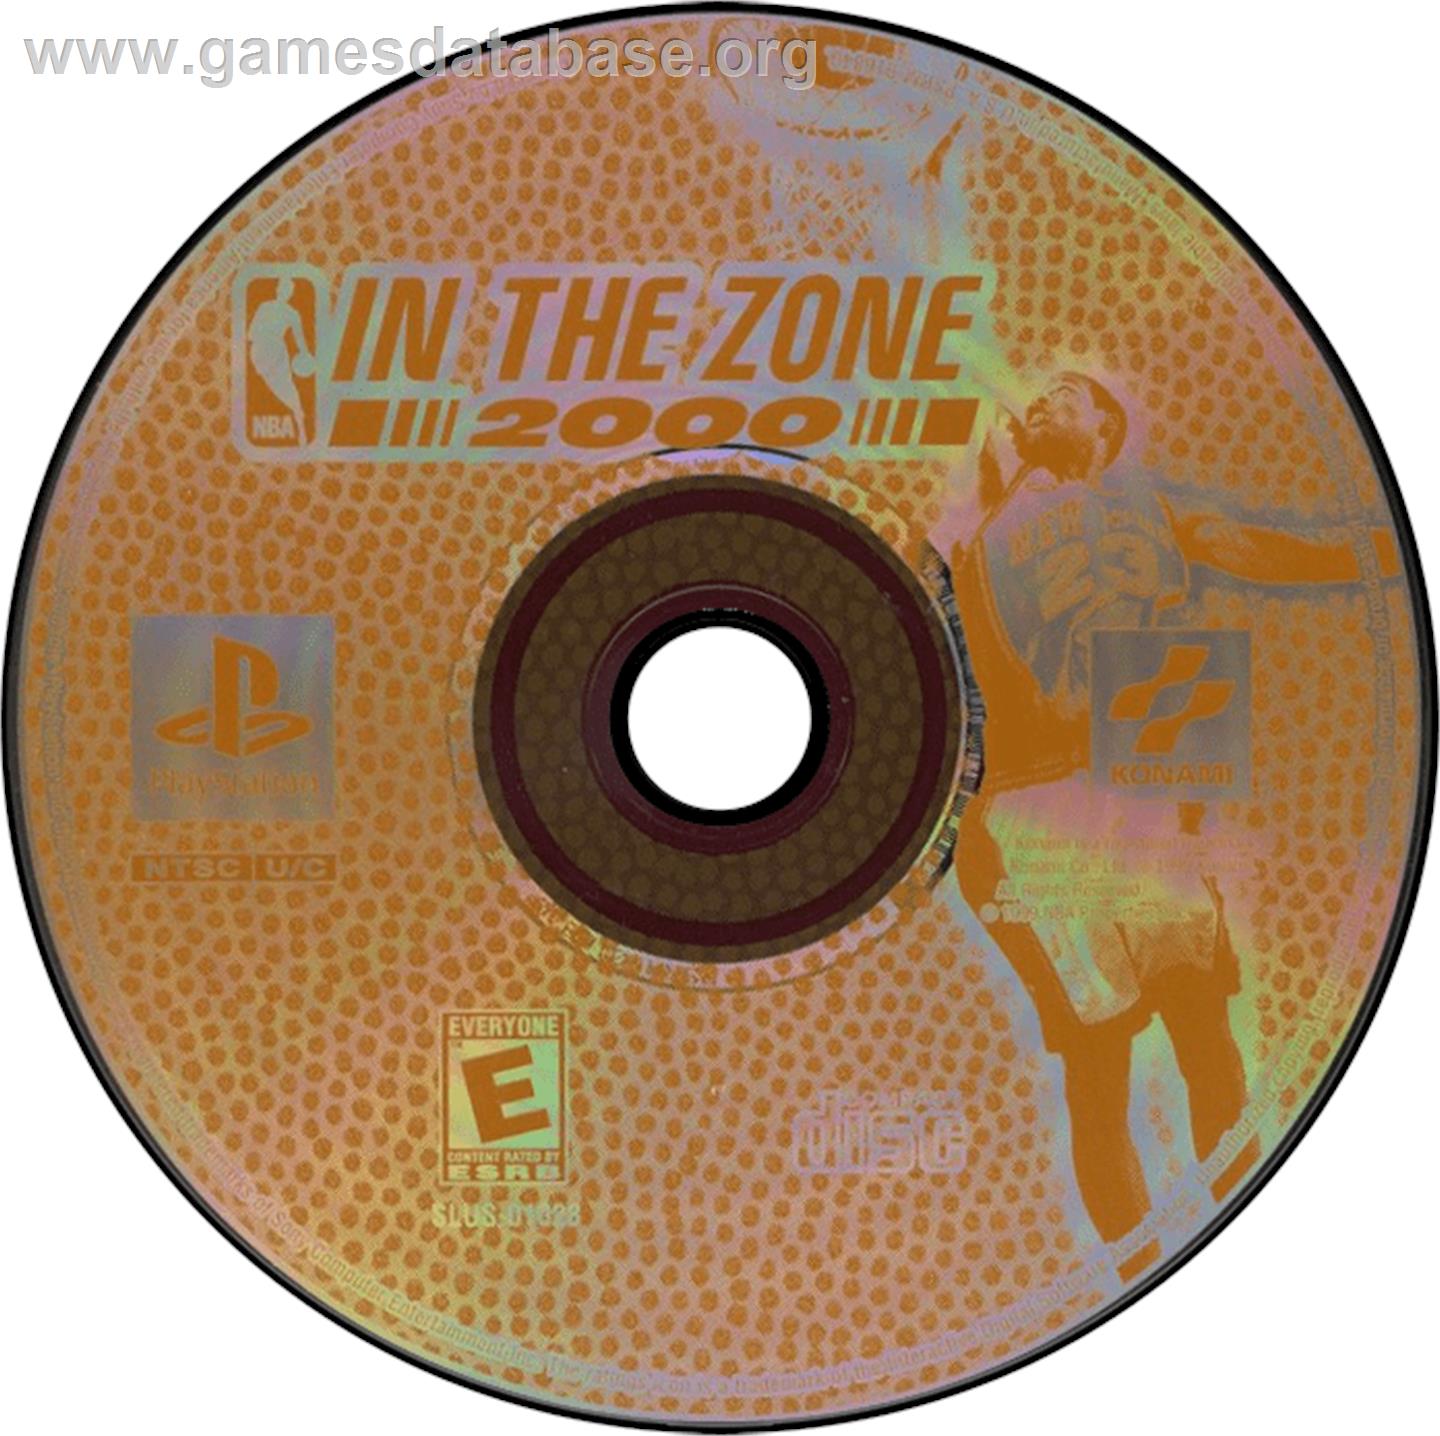 NBA in the Zone 2000 - Sony Playstation - Artwork - Disc